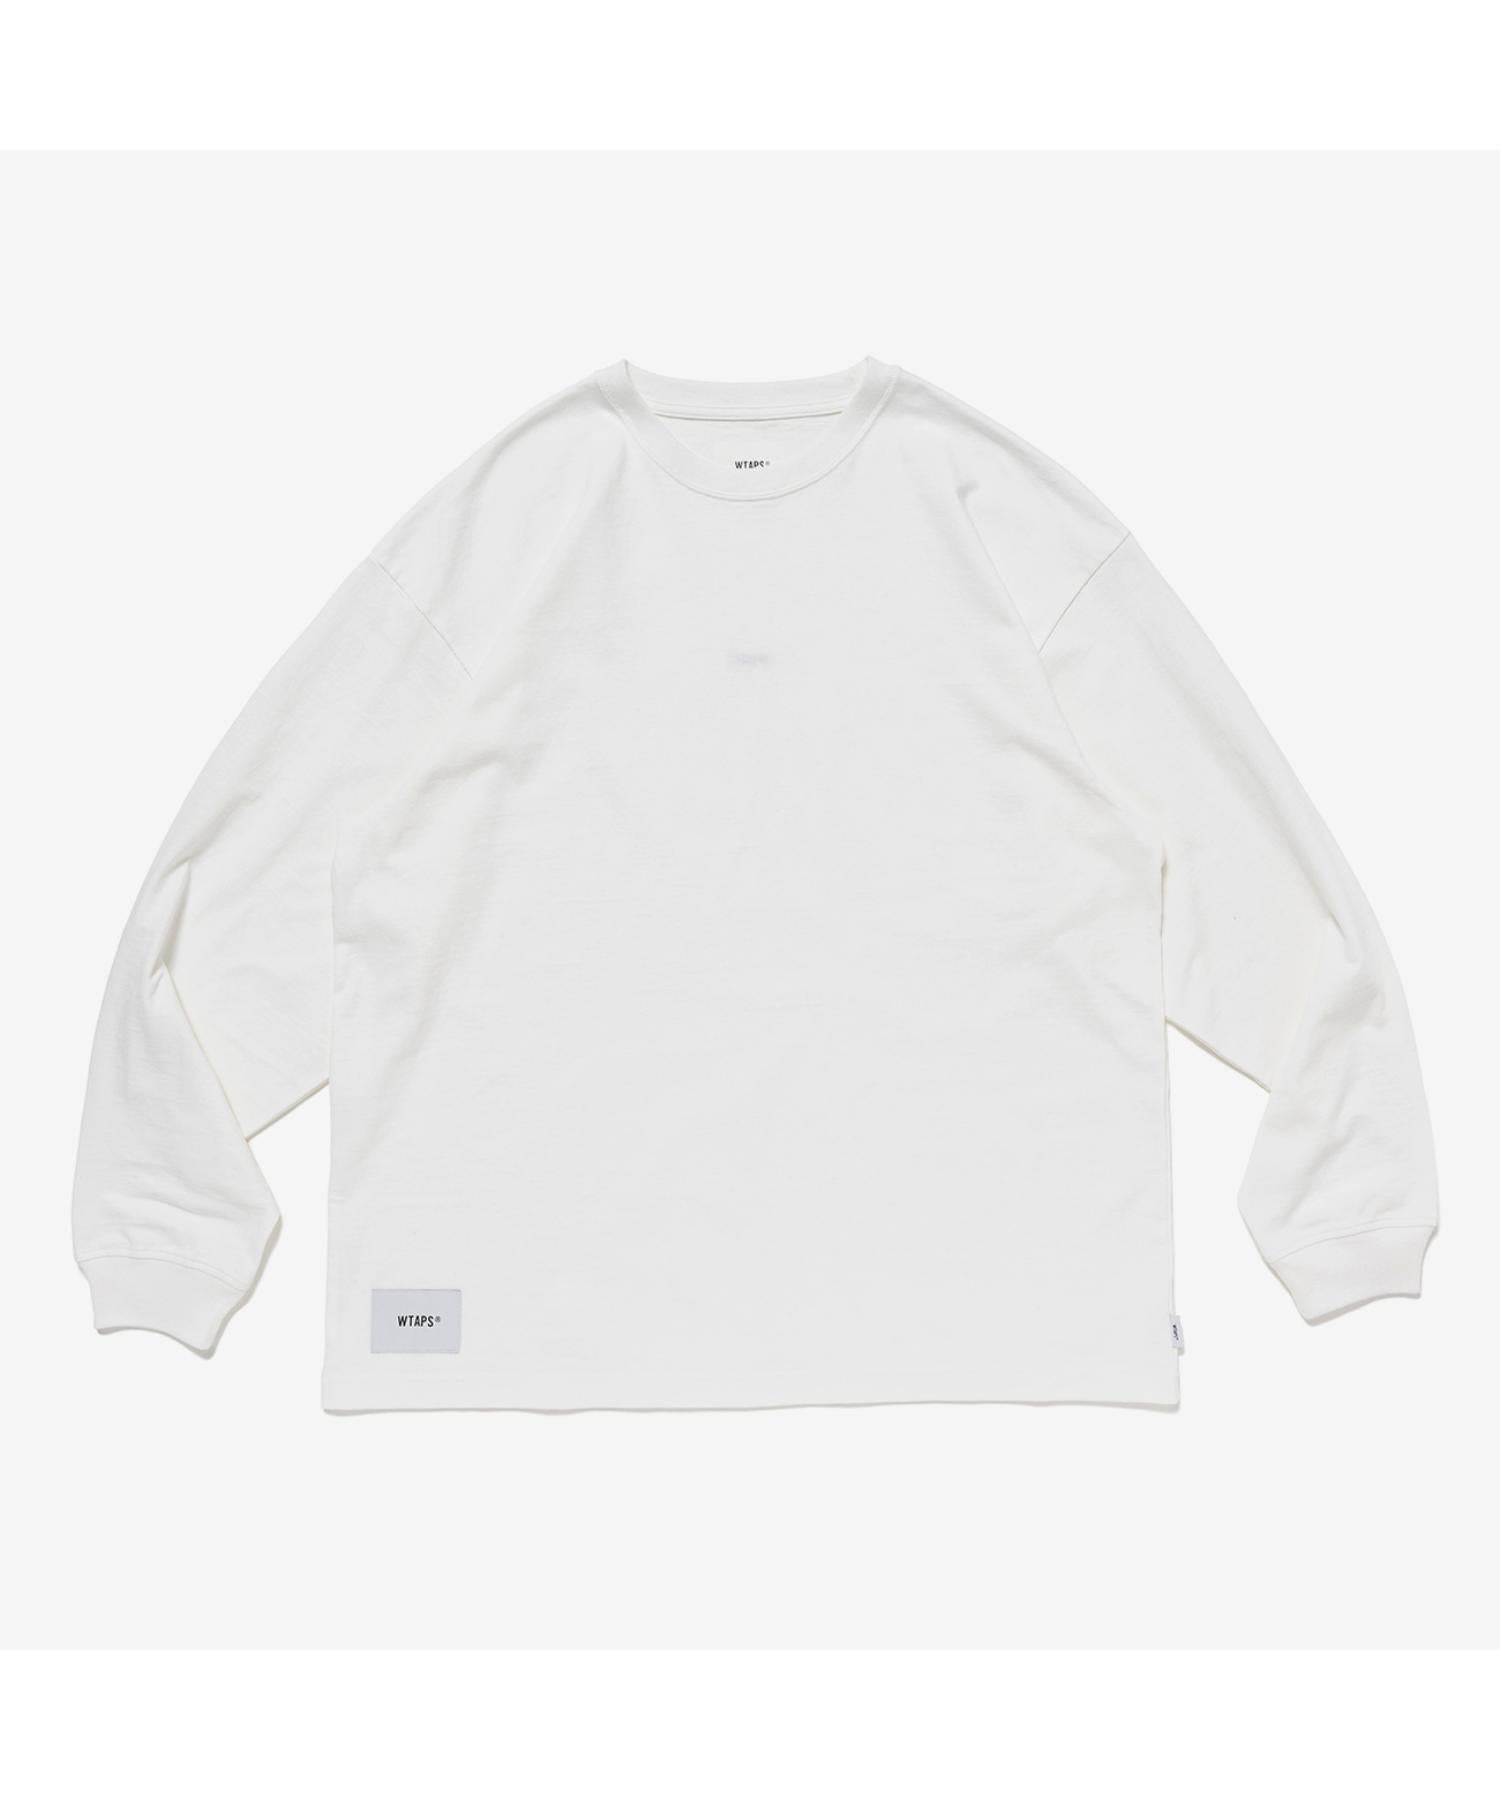 AII 01 / LS / COTTON. SIGN - WTAPS (ダブルタップス) - tops 